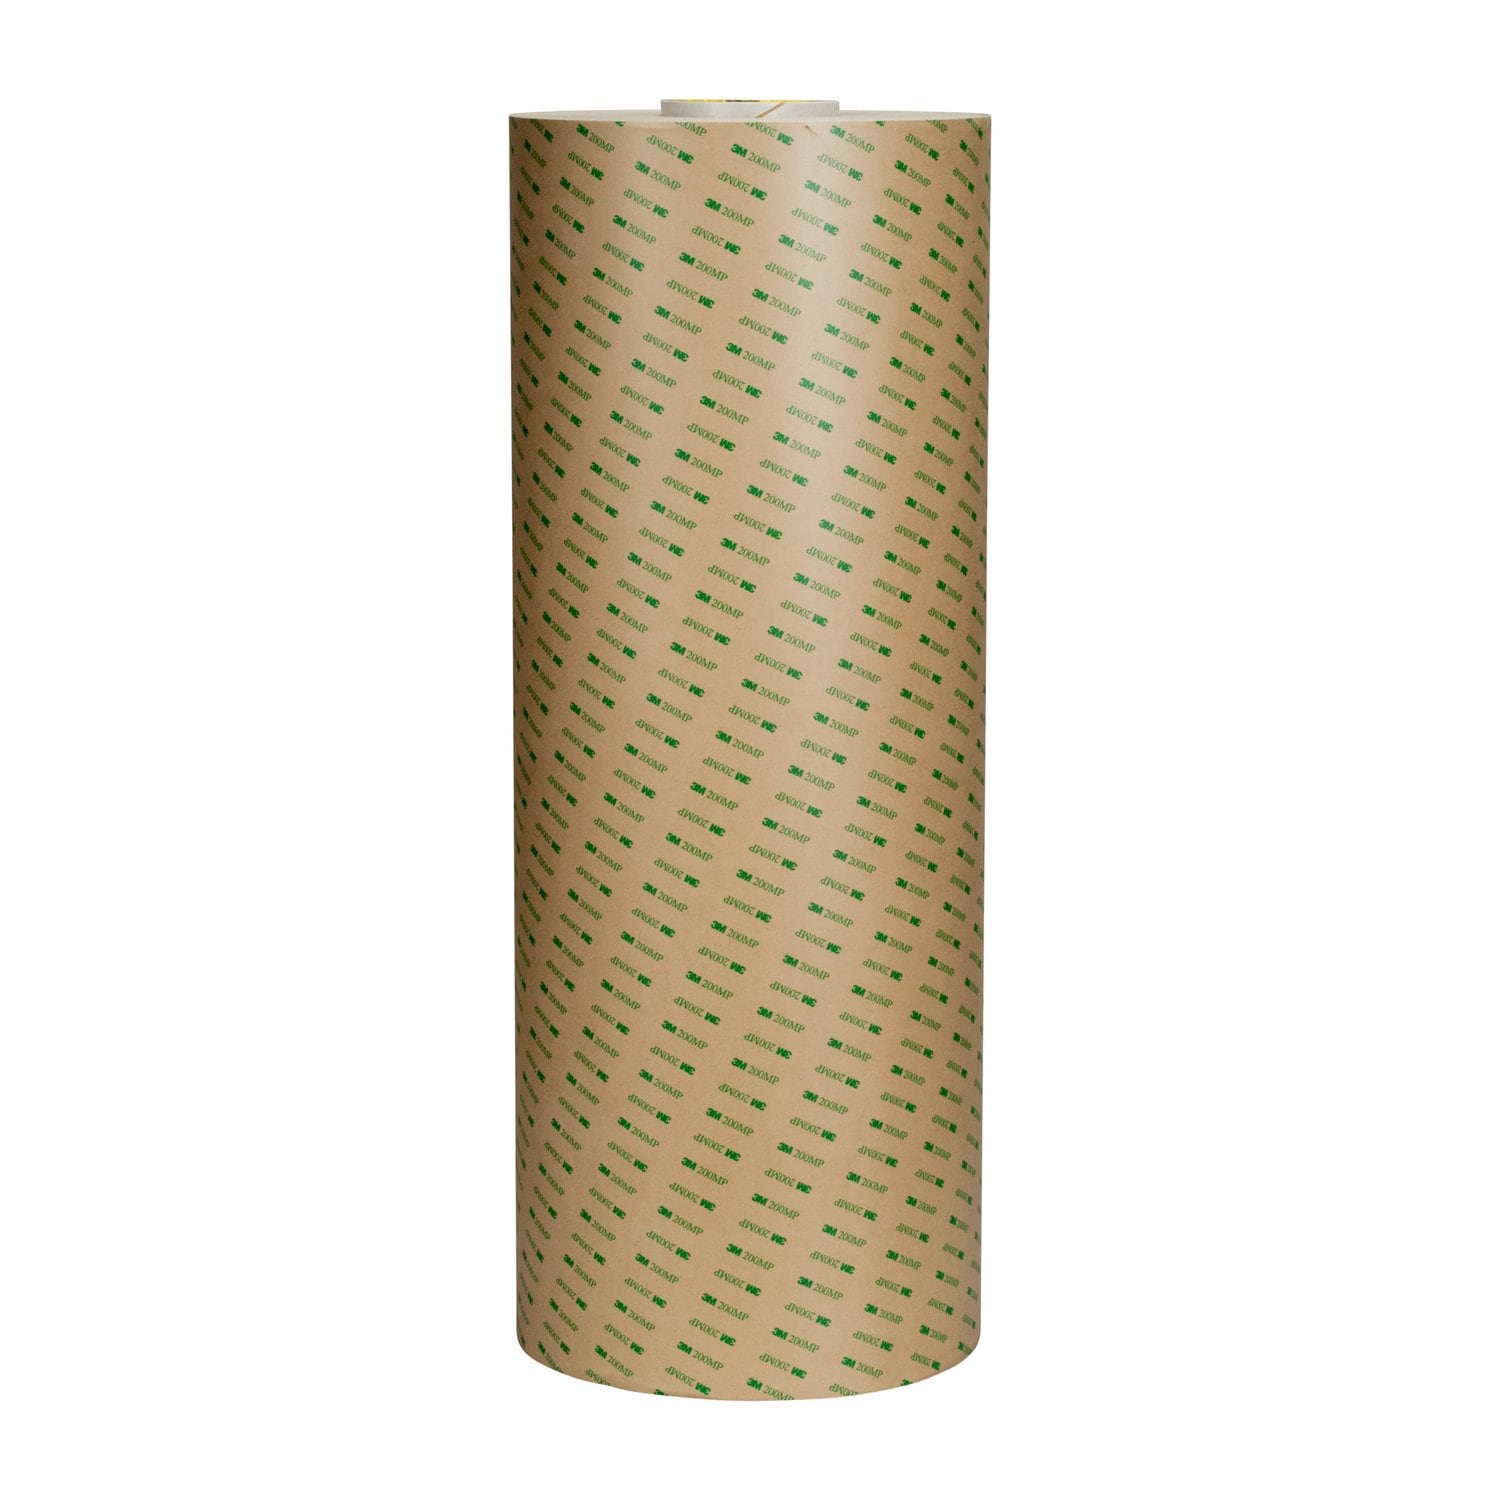 7010373585 - 3M Adhesive Transfer Tape 9667MP, Clear, 24 in x 60 yd, 2 Mil, 1/Case